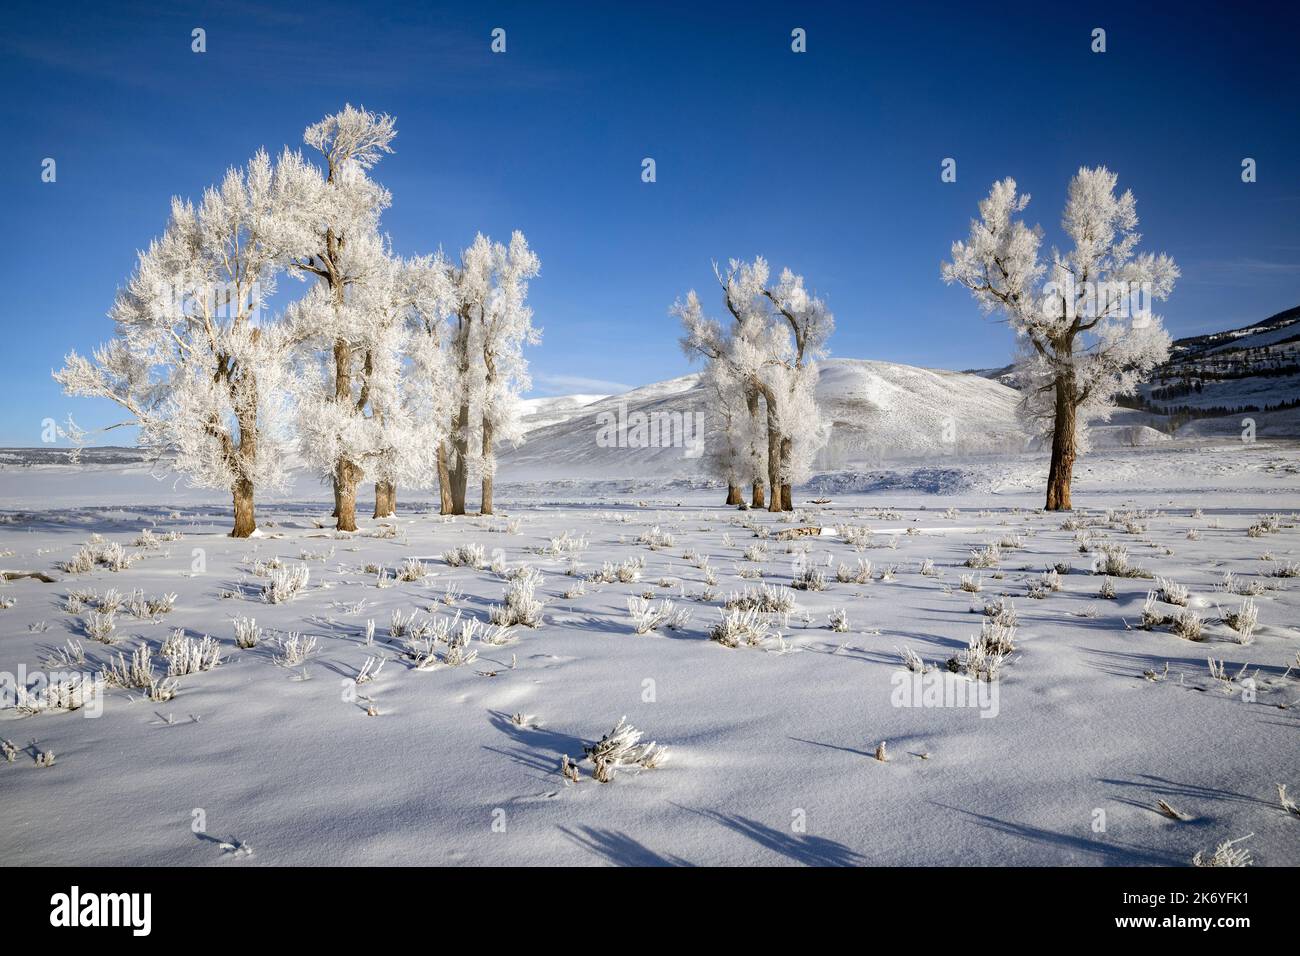 WY05132-00....Wyoming - Frosted Trees dans le parc national de Lamar Valley of Yellowstone. Banque D'Images